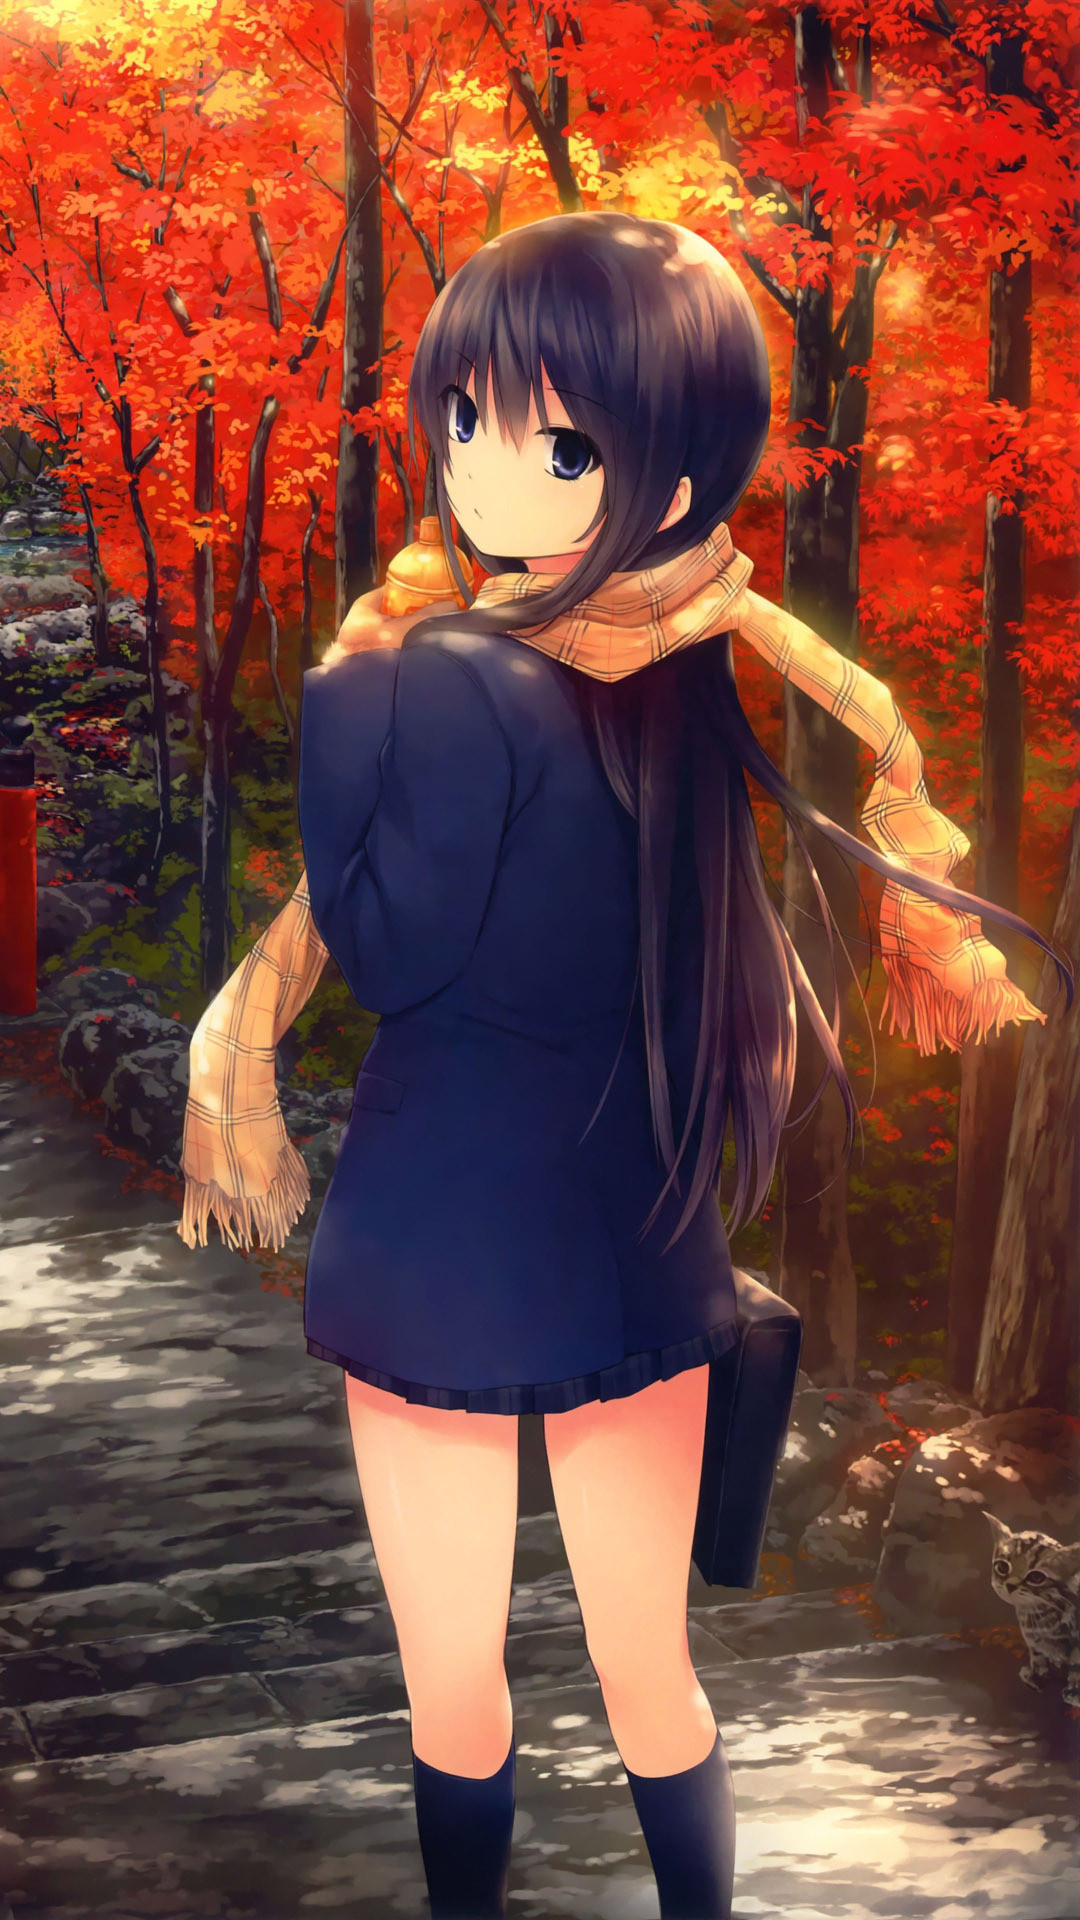 1080x1920 ... Girl walking on a fall day Anime mobile wallpaper